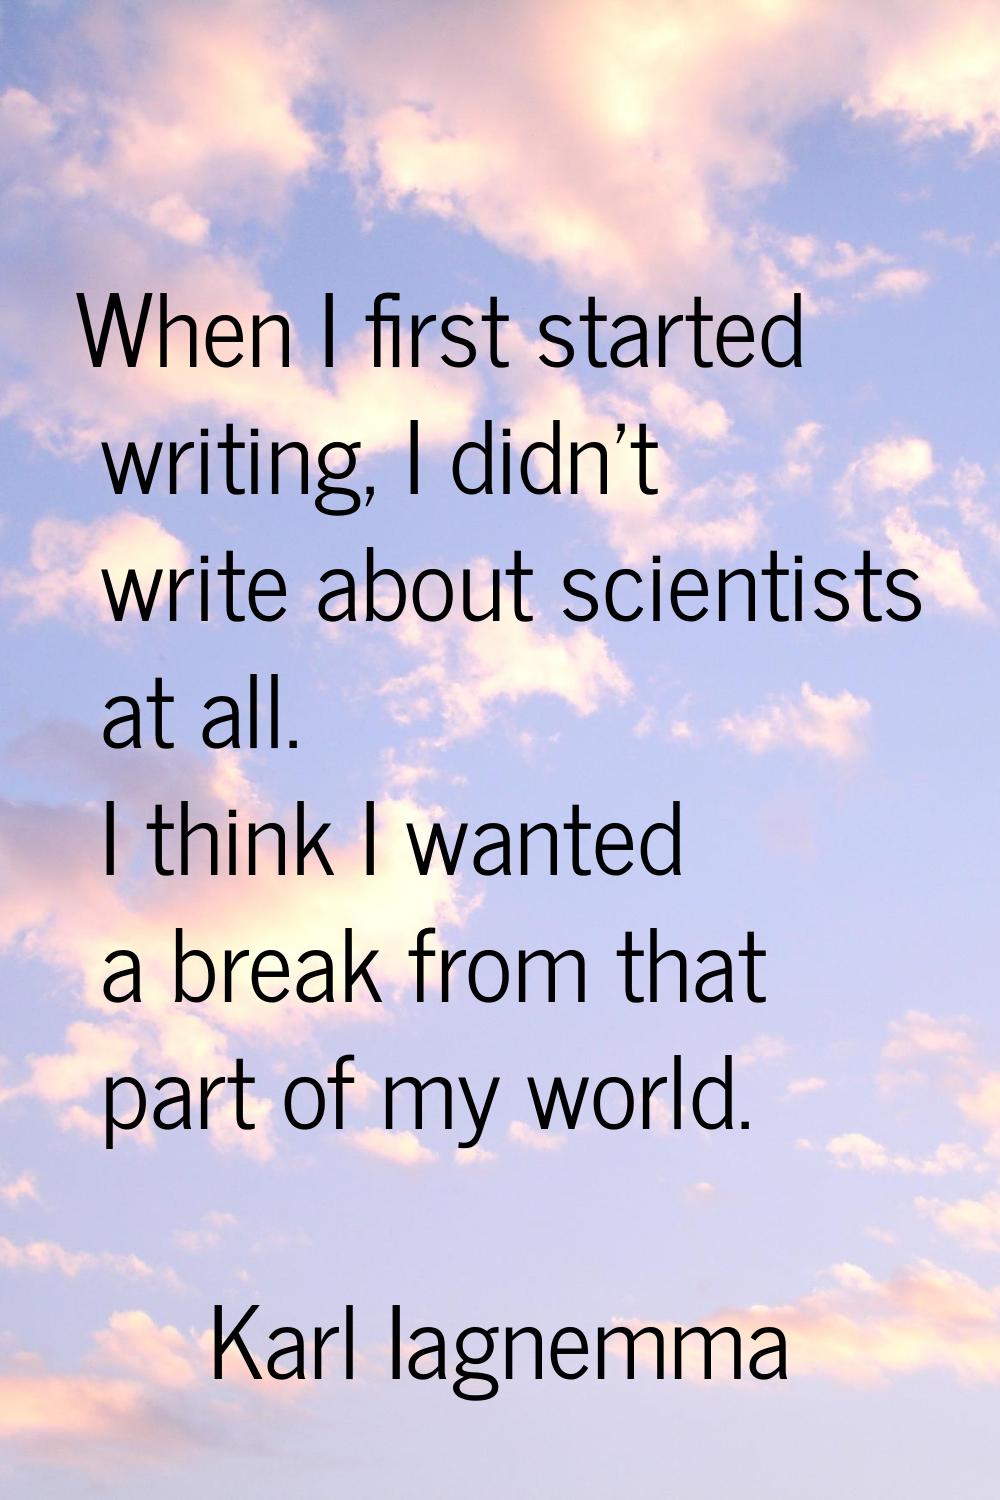 When I first started writing, I didn't write about scientists at all. I think I wanted a break from